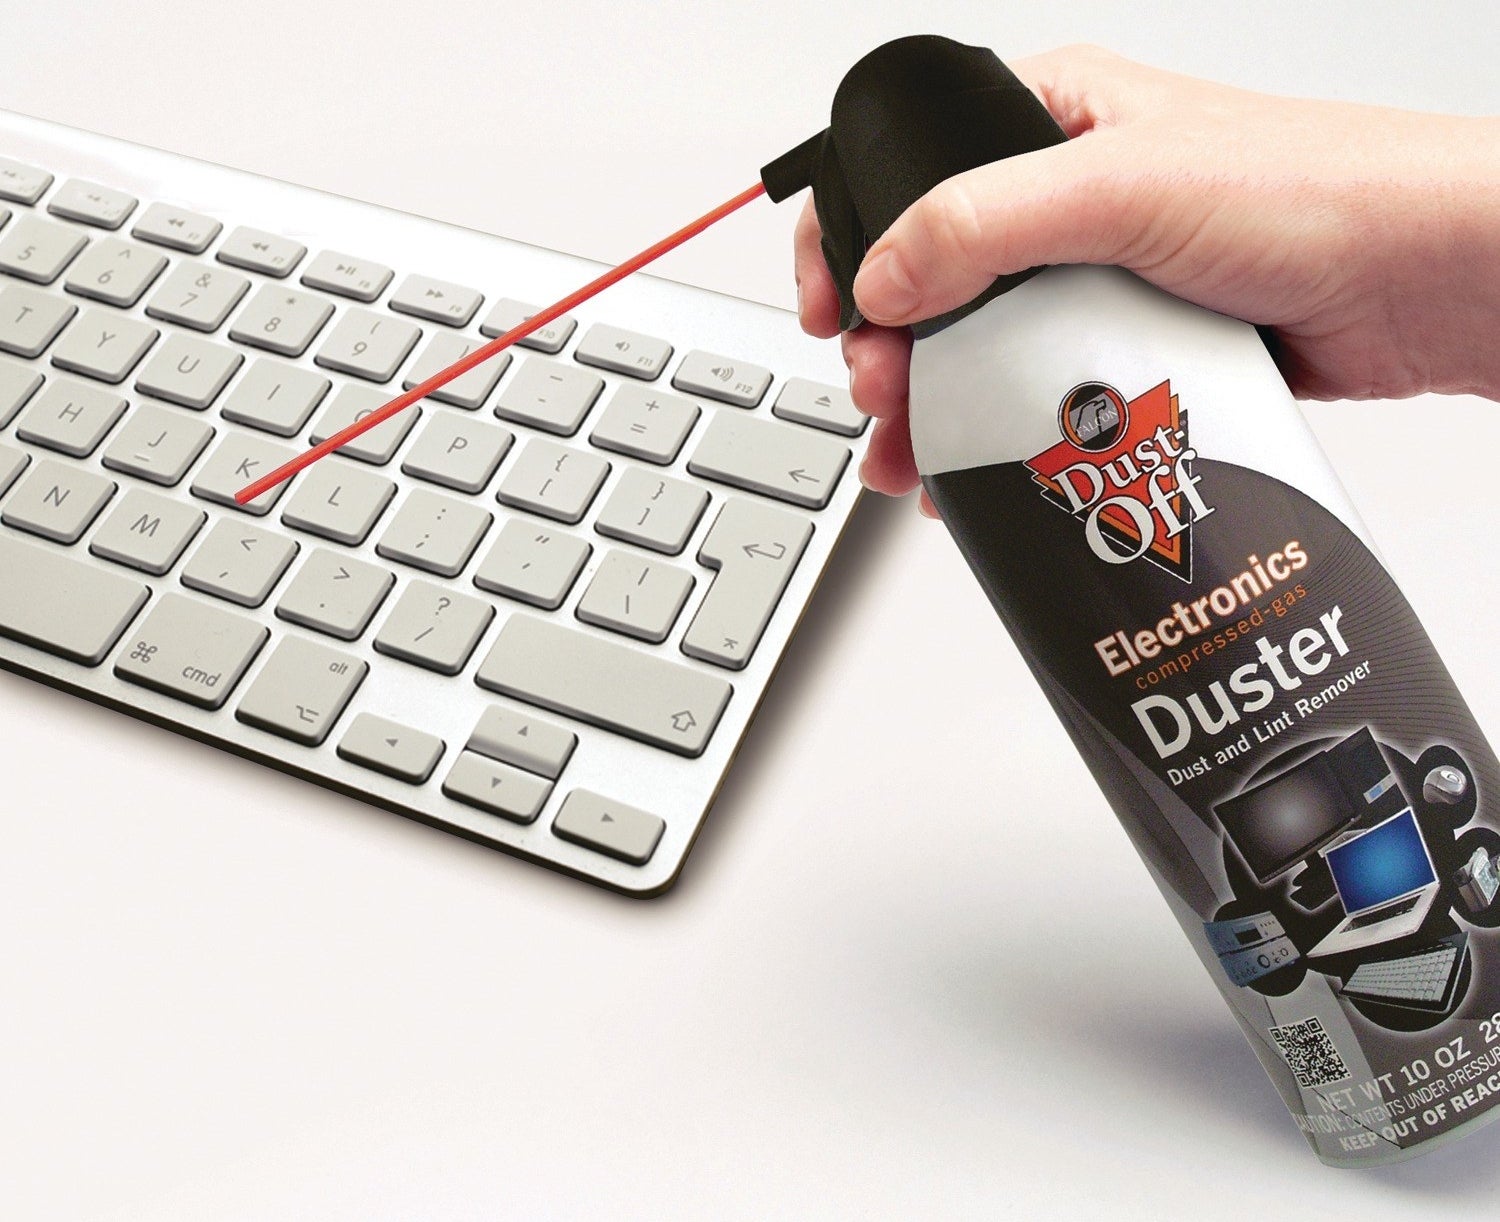 A can of Dust Off being used to clean an Apple keyboard